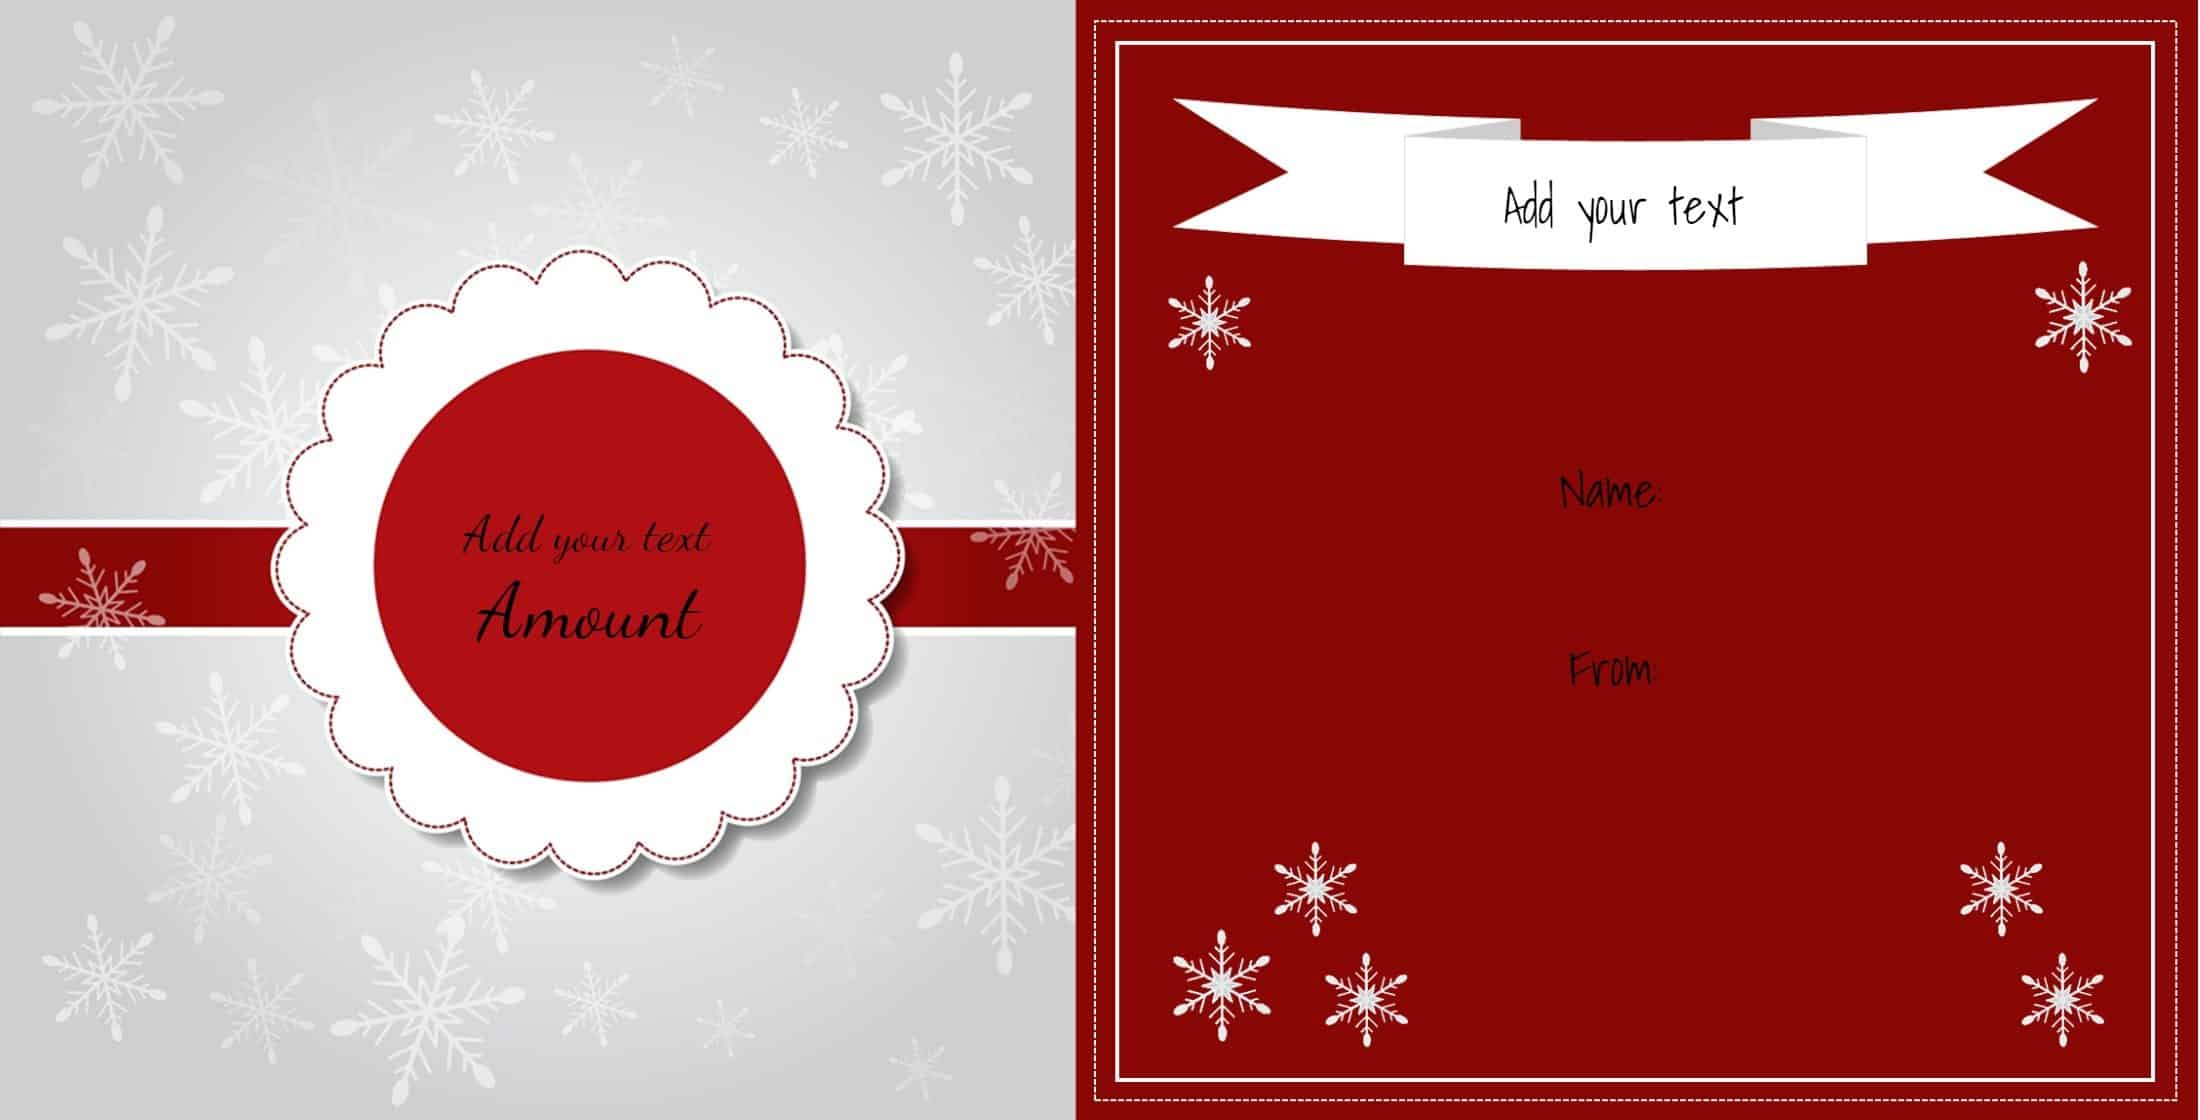 Free Christmas Gift Certificate Template | Customize Online & Download